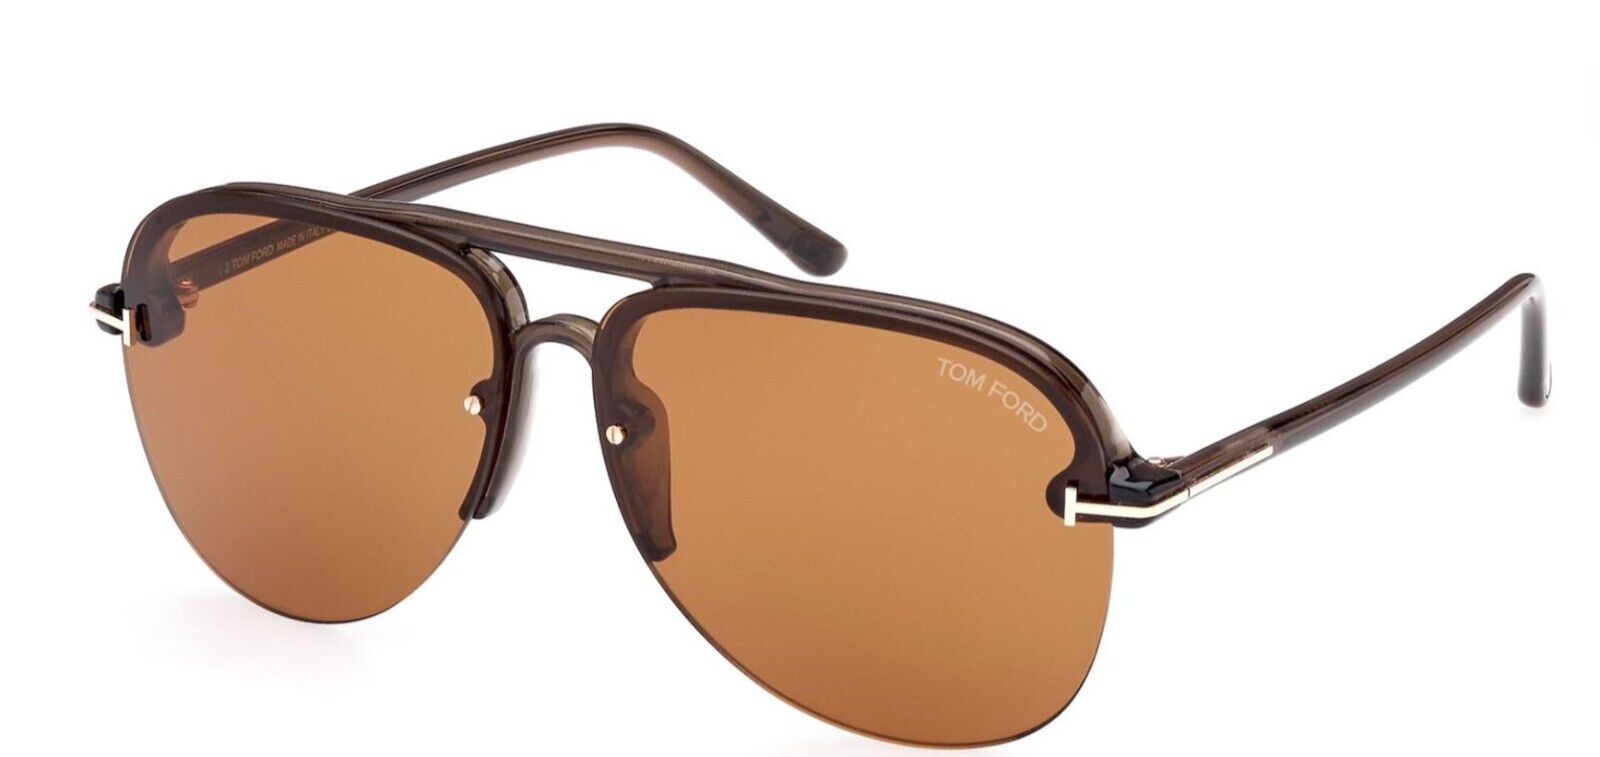 Tom Ford FT 1004 Terry-02 51E Shiny Pale Gold/Brown Men's Sunglasses